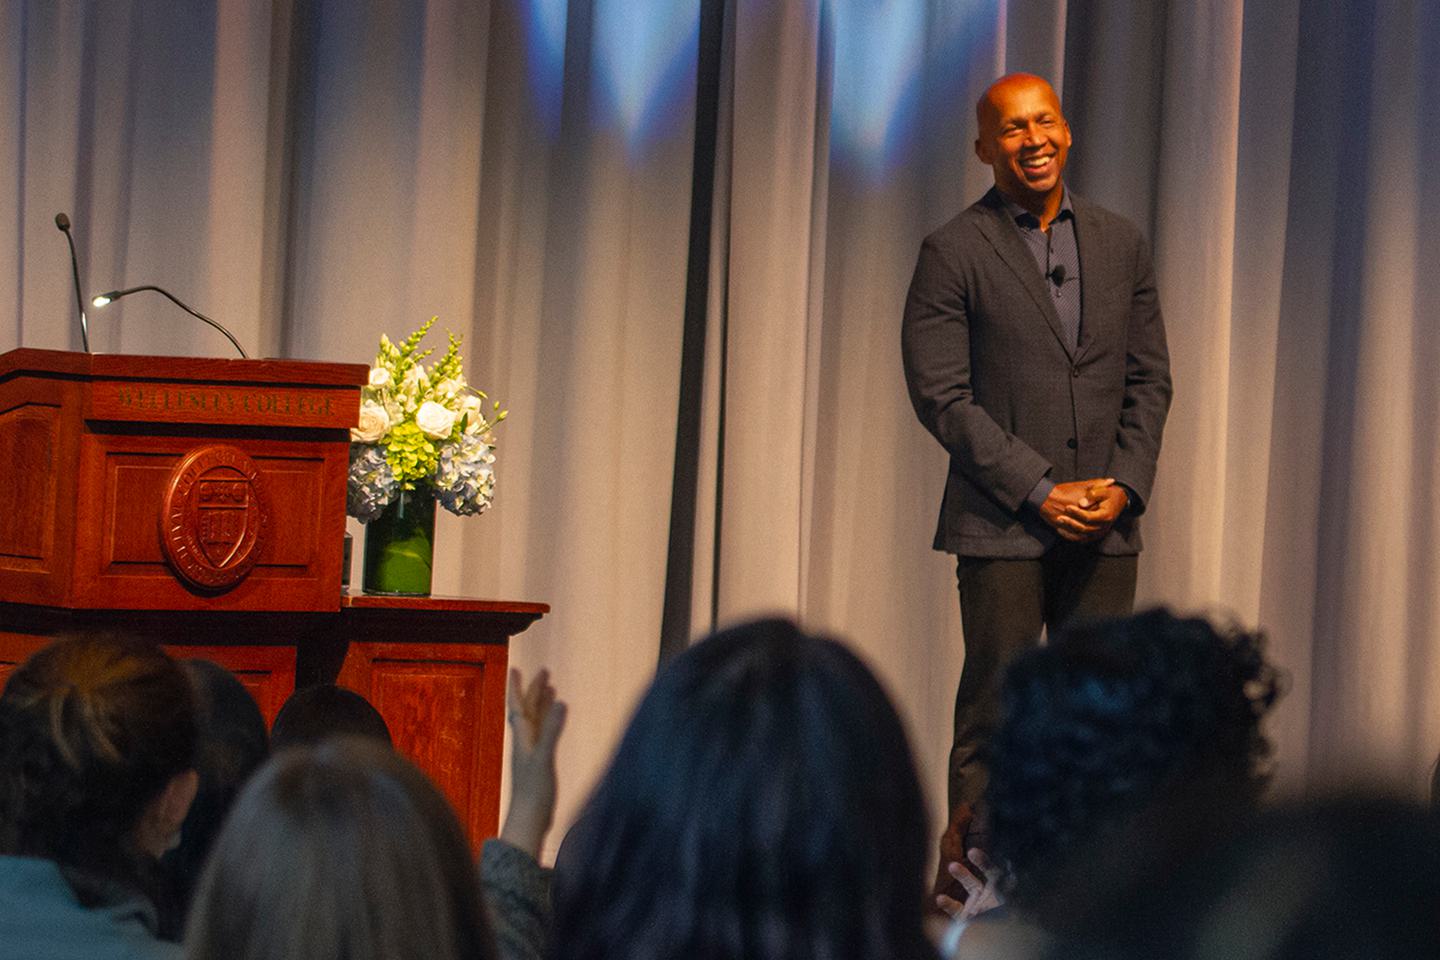 Civil Rights Lawyer Bryan Stevenson smiles while receiving a standing ovation.